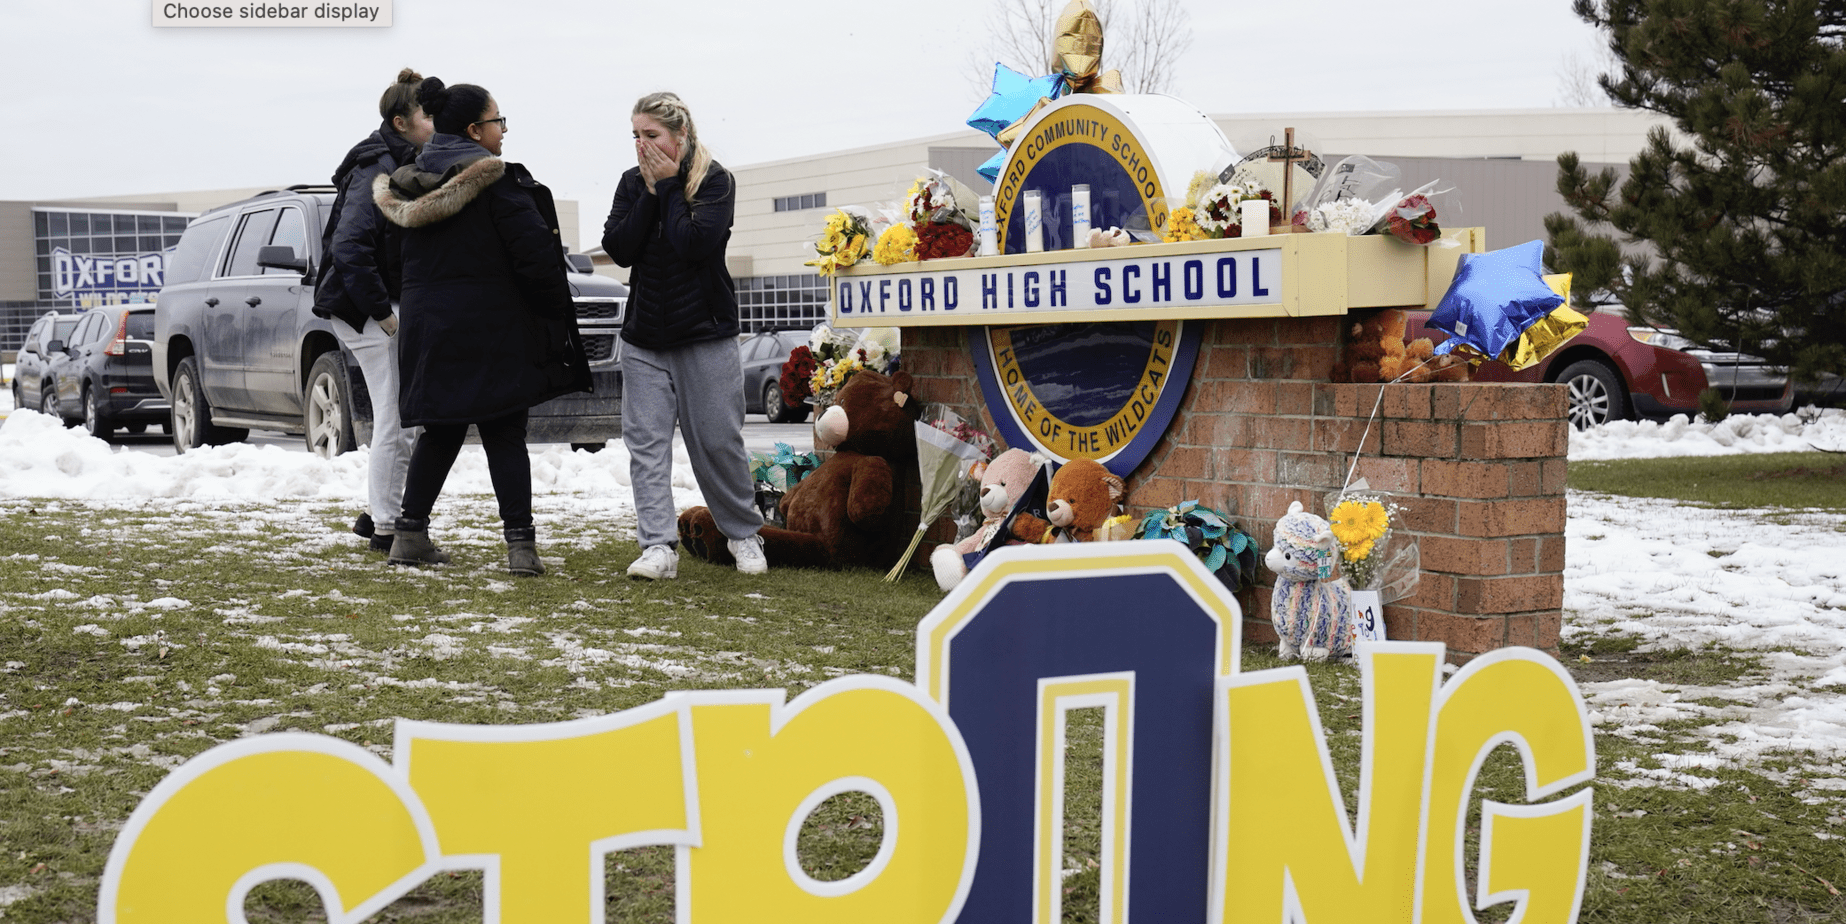 A petition to rename Oxford High Shcool's football field after Tate Myre, the player who sacrificed his life trying to disarm the school shooter, underway